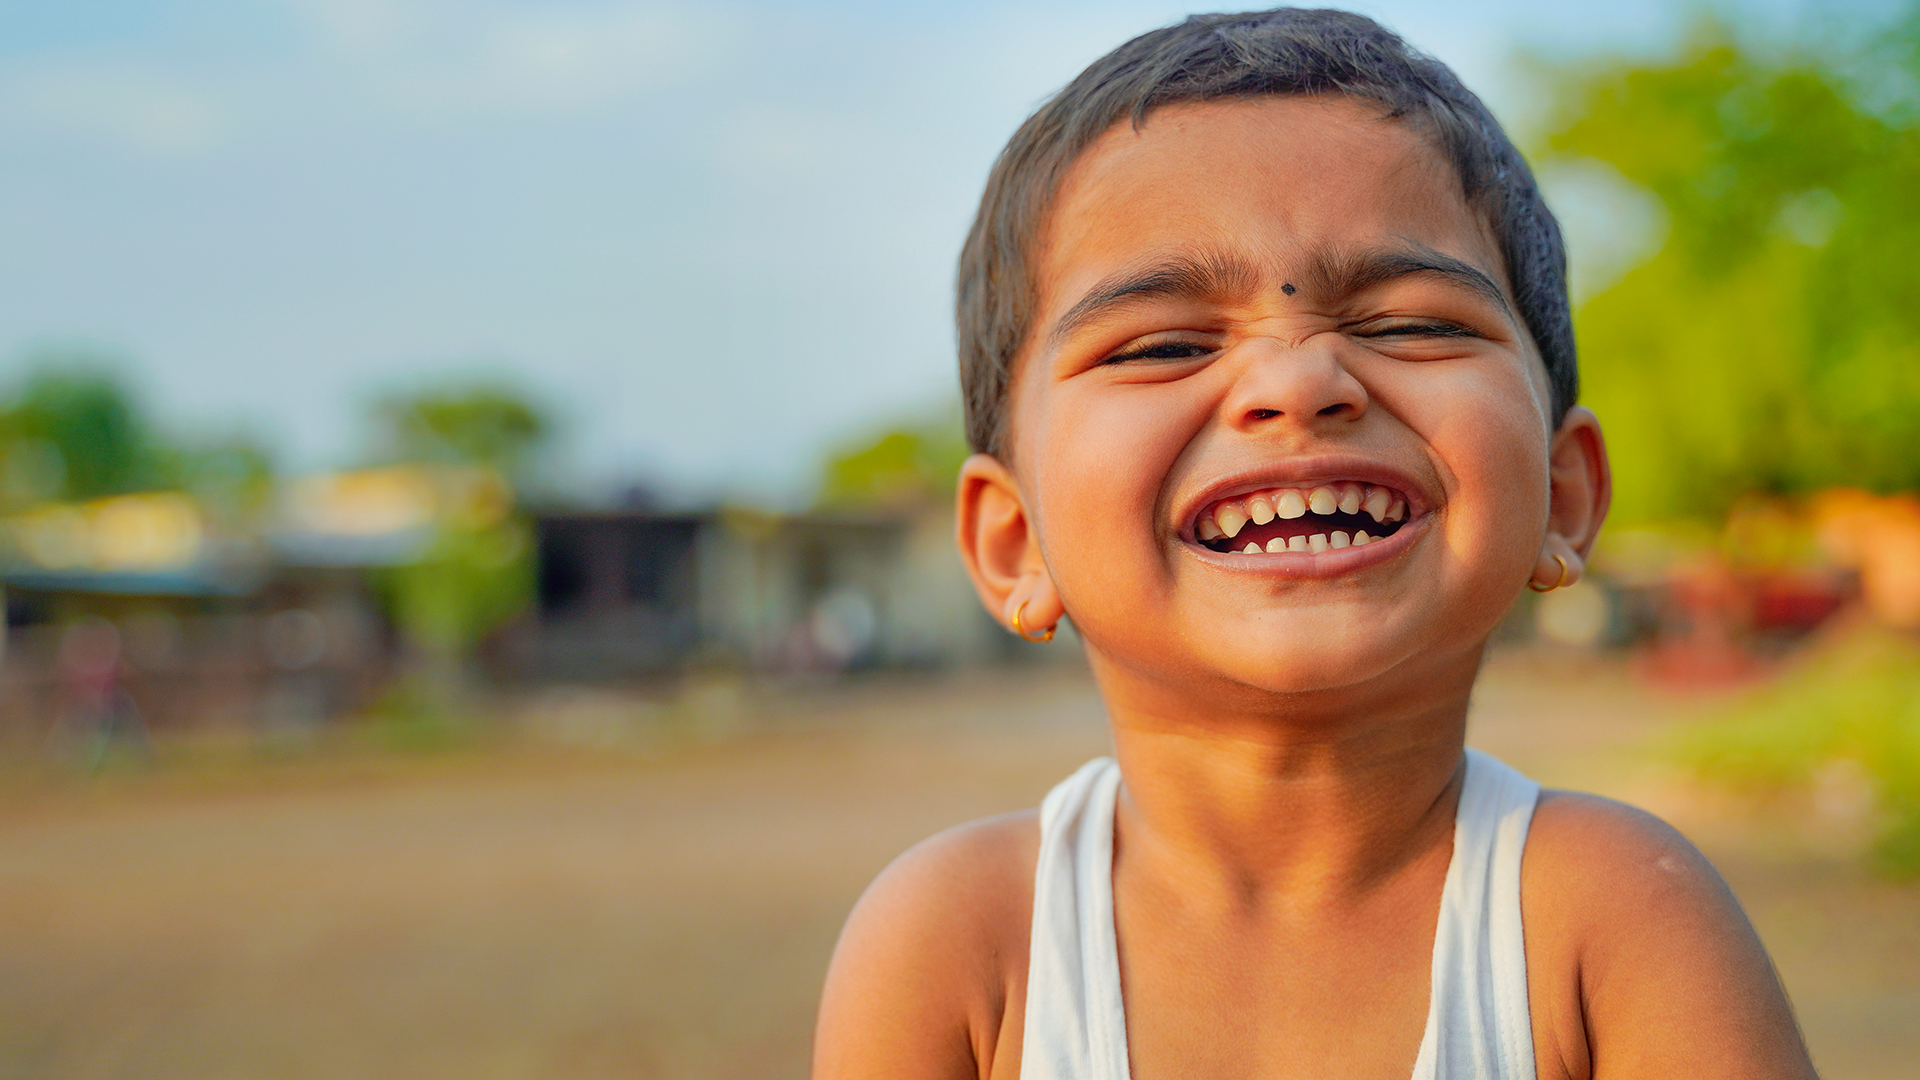 World Laughter Day celebrates the beauty of laughter and its positive effects on us